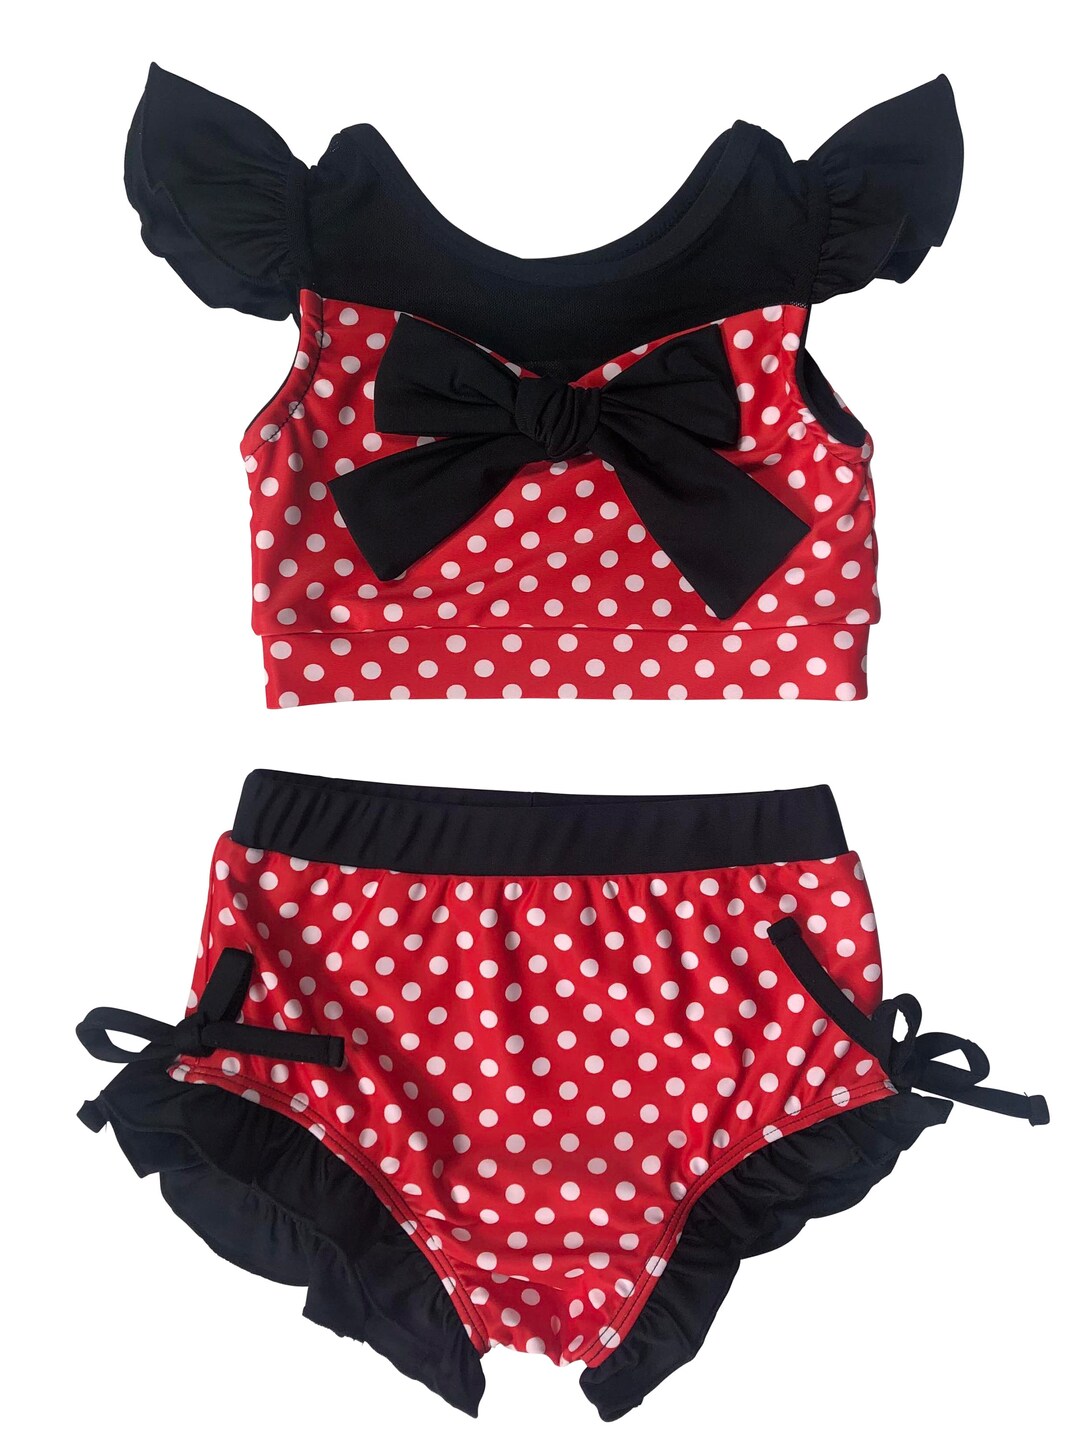 THE ORIGINAL Minnie Mouse Bathing Suit,girls Swimsuit,toddler Swimming ...